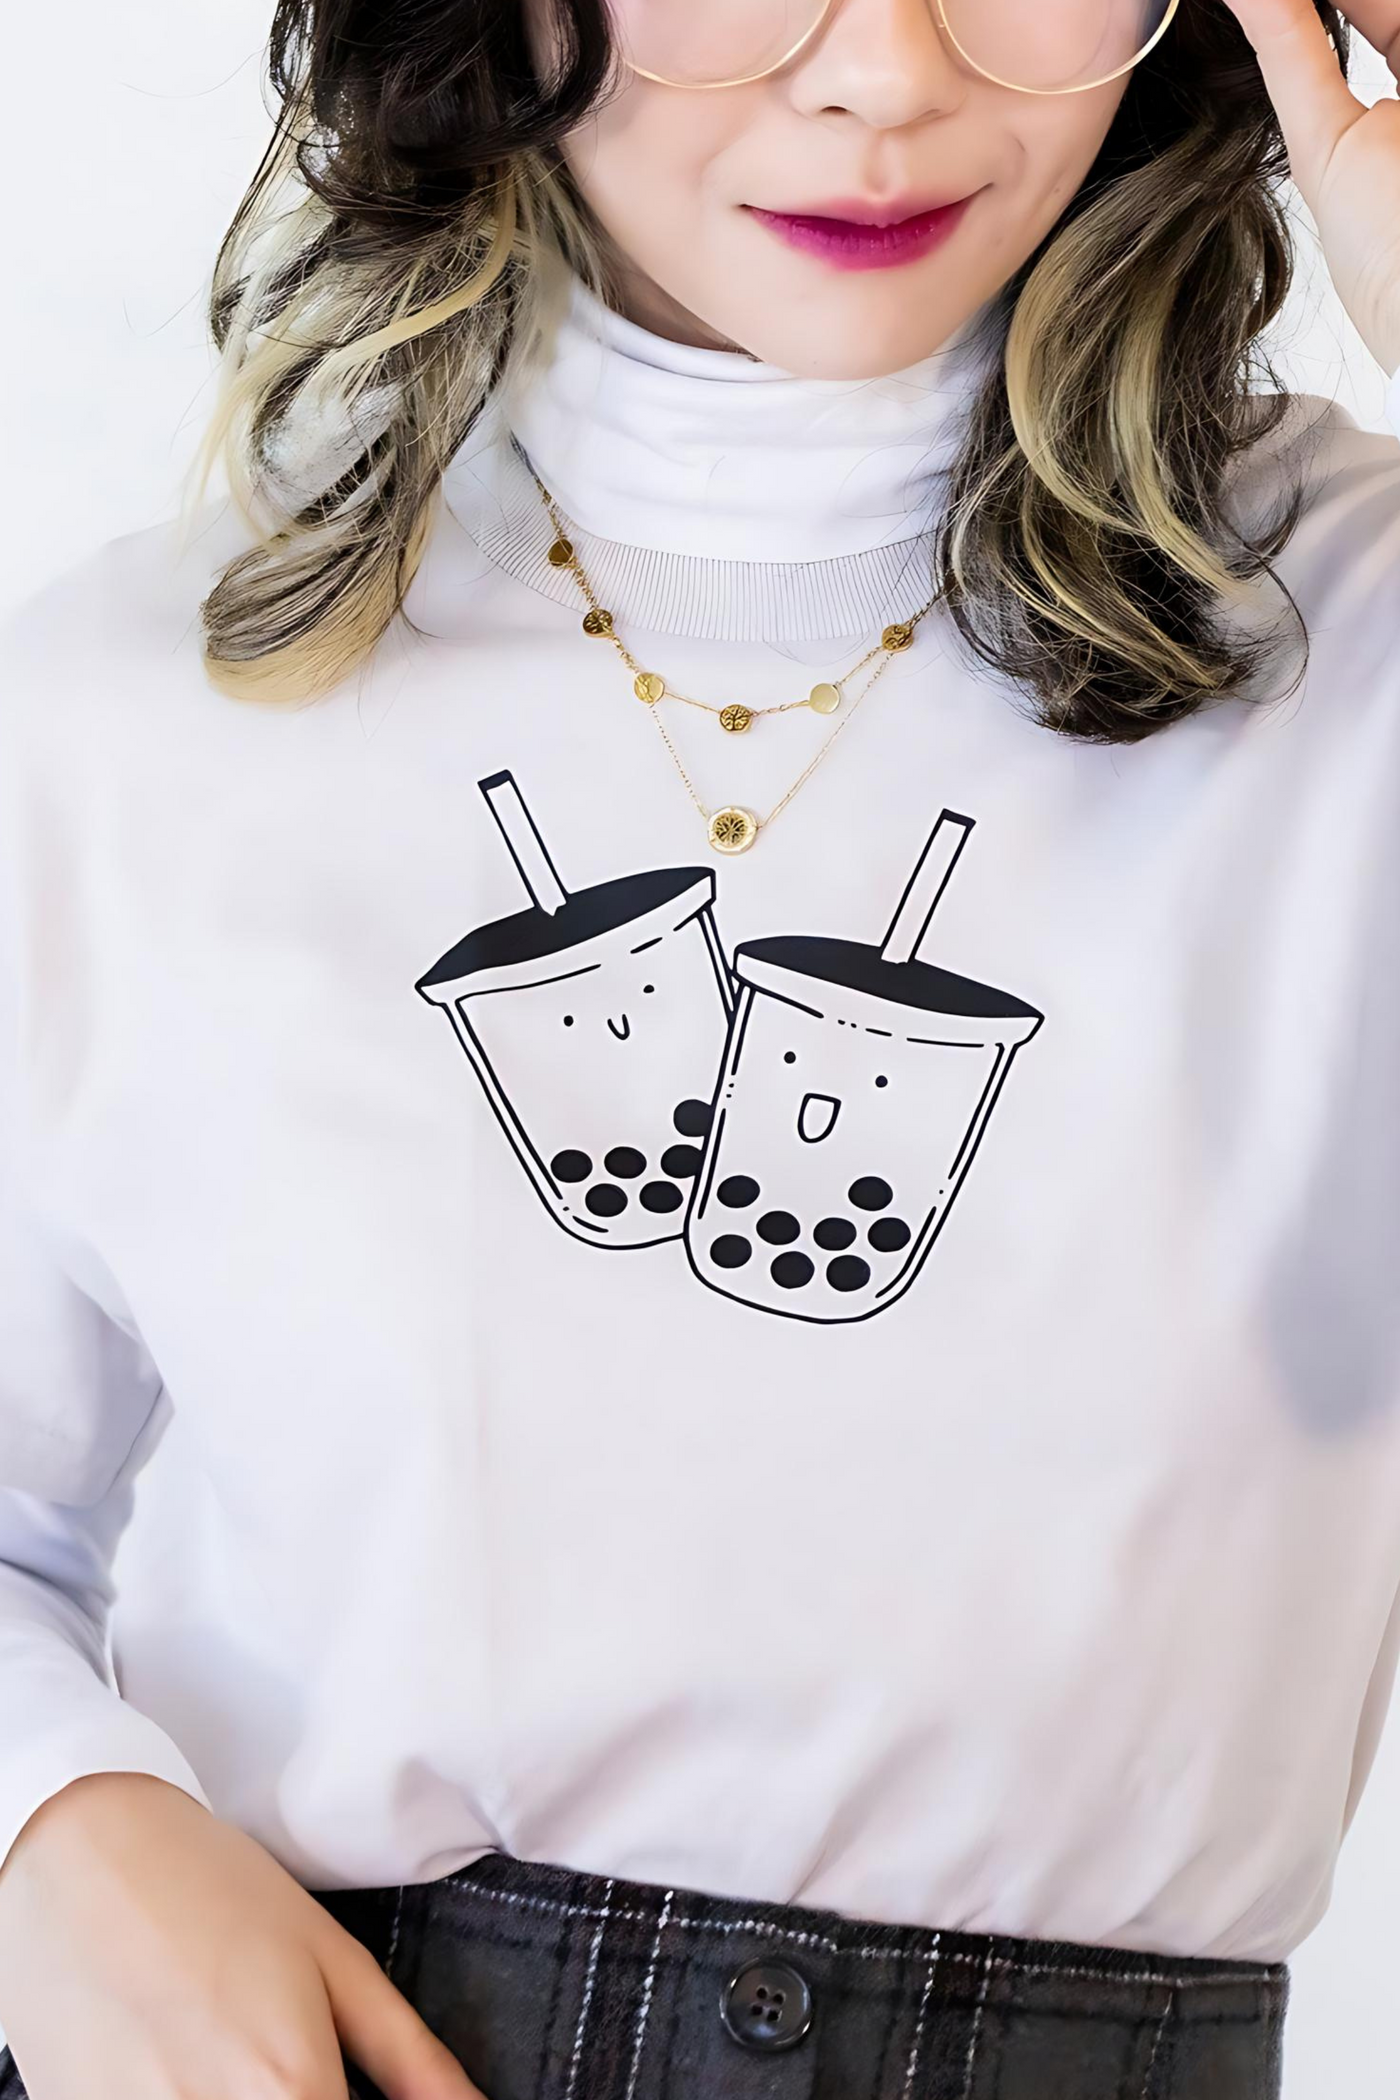 Twin Teas Boba Cup Cartoon T-shirt: Express Your Love for Boba in Style